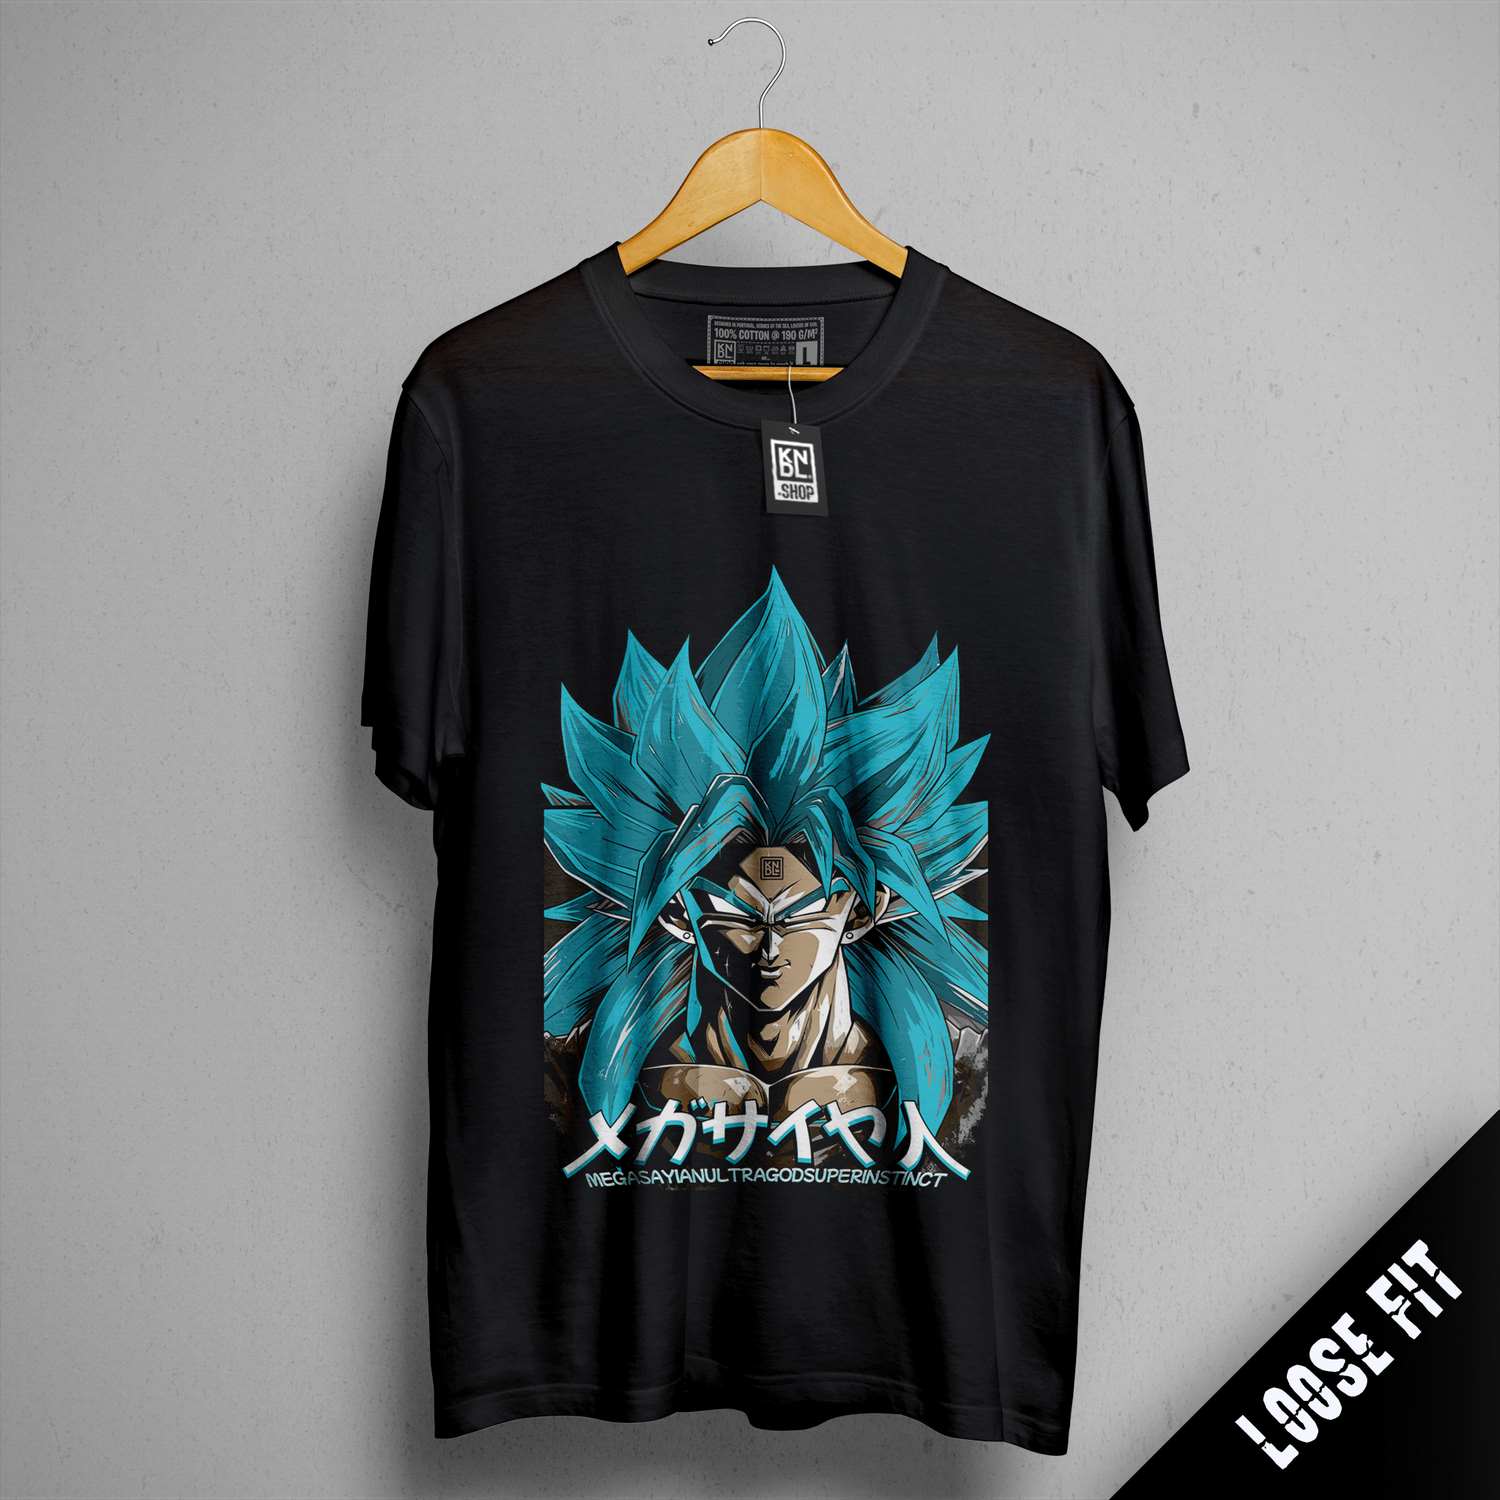 a black t - shirt with a picture of gohan on it